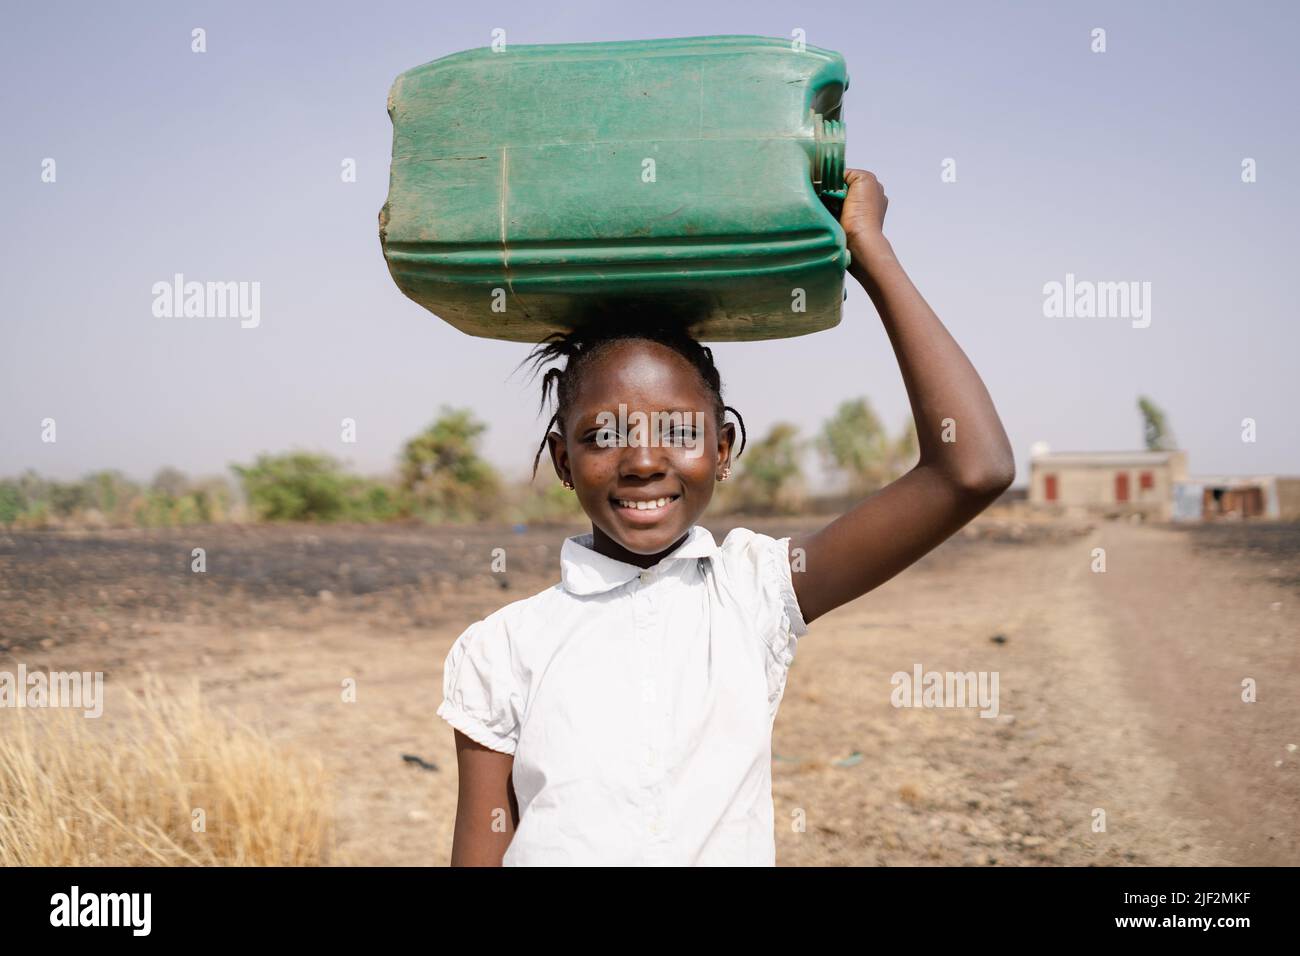 Smiling African village girl carrying a large green canister on her head as she walks to the community water station; human right to safe drinking wat Stock Photo